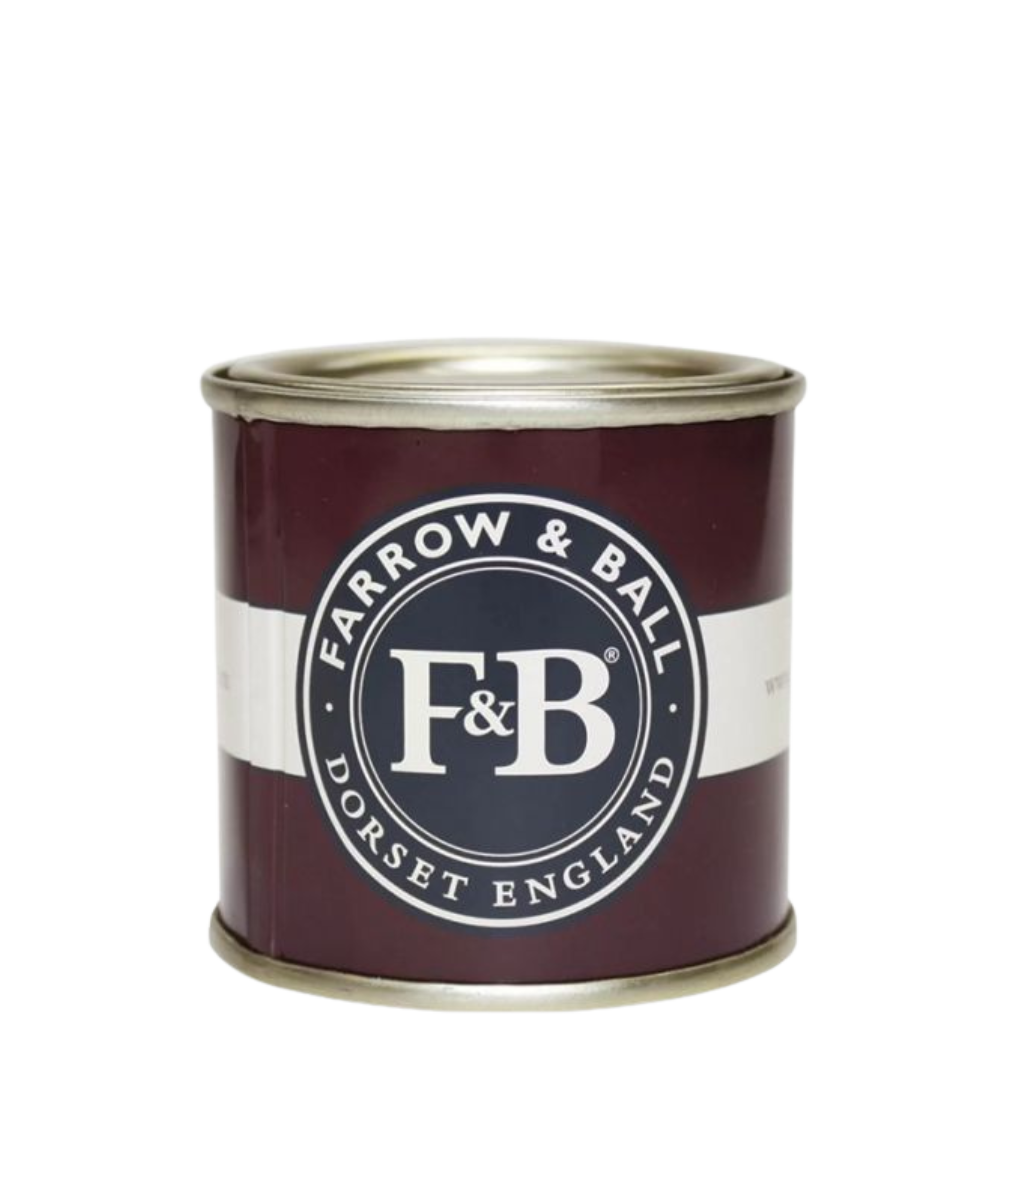 Farrow & Ball Sample Pots available at Regal Paint Centers